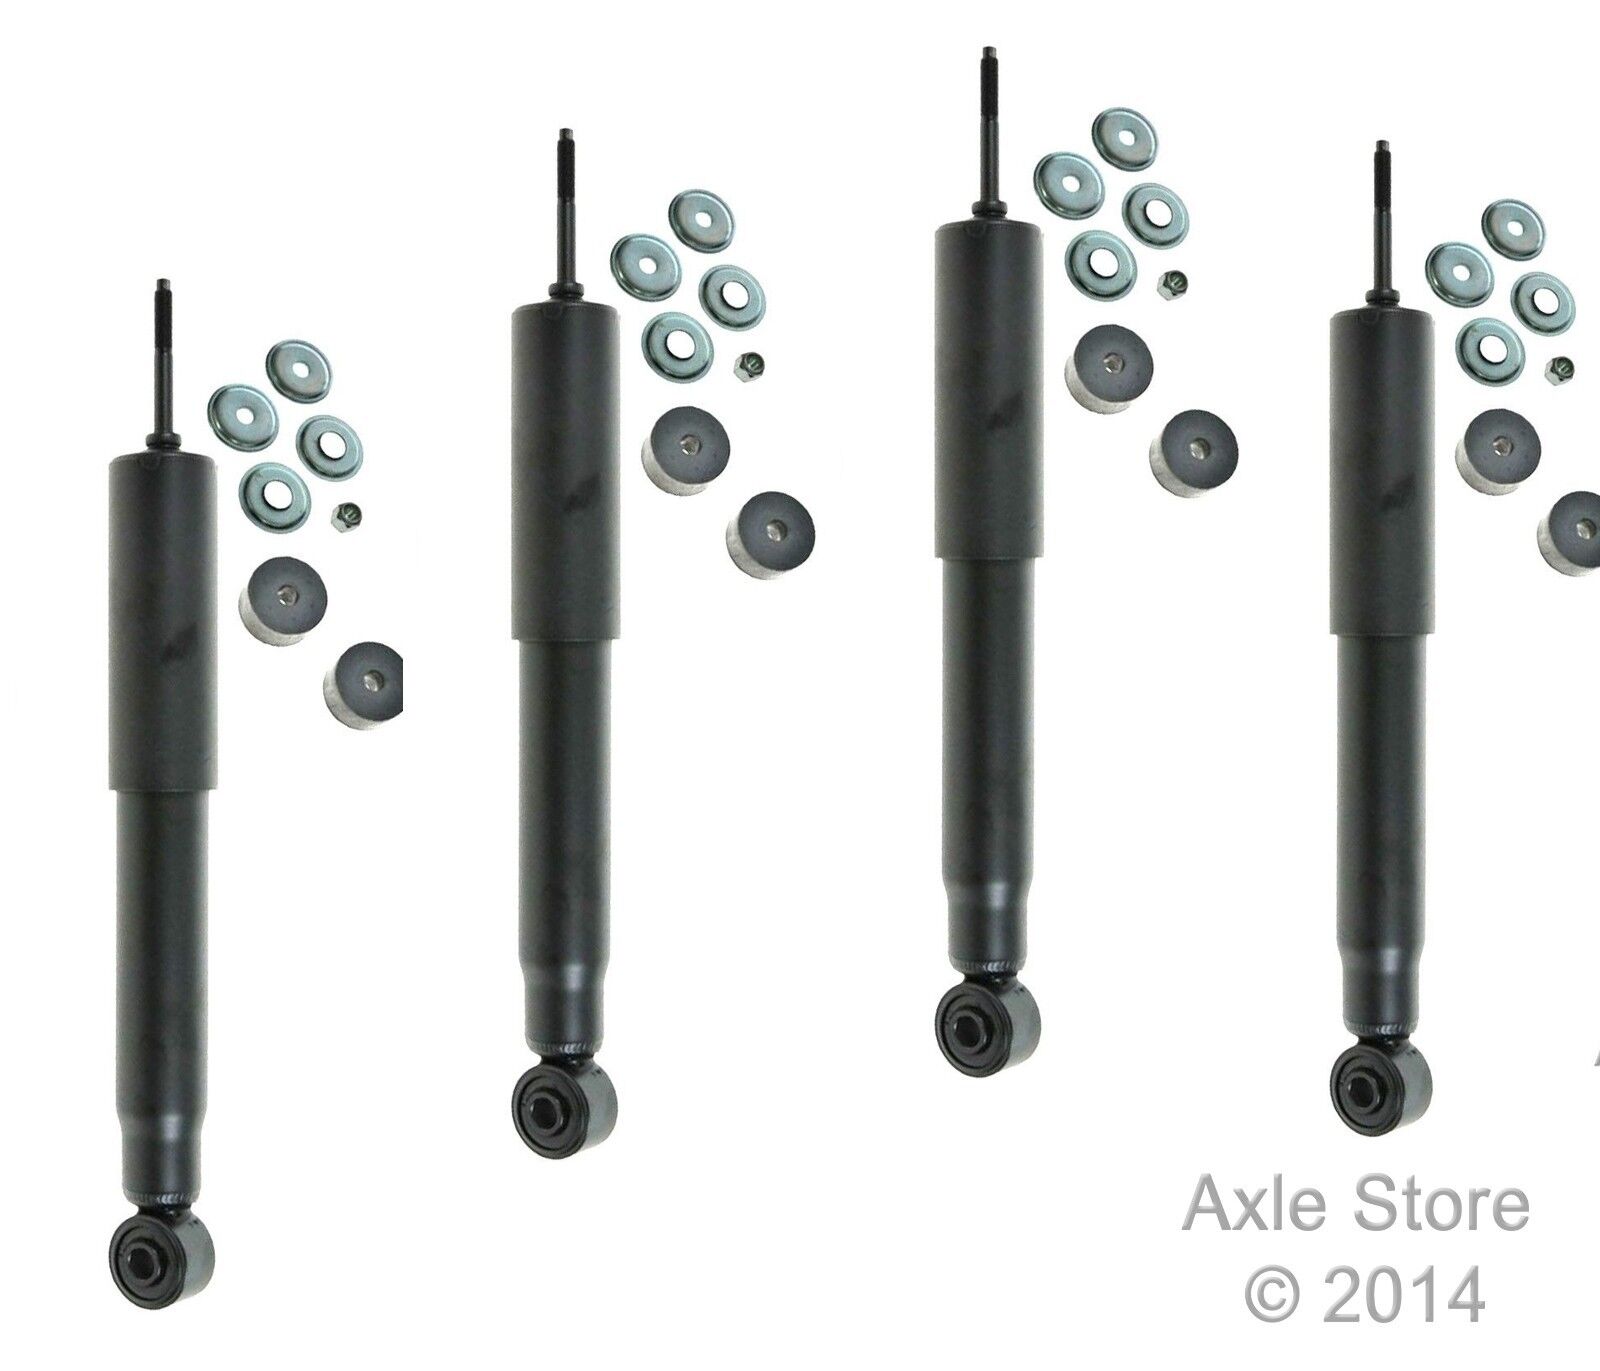 4 New Shocks Full Set Fit 1997 - 2004 Ford F150 4WD Models Only 